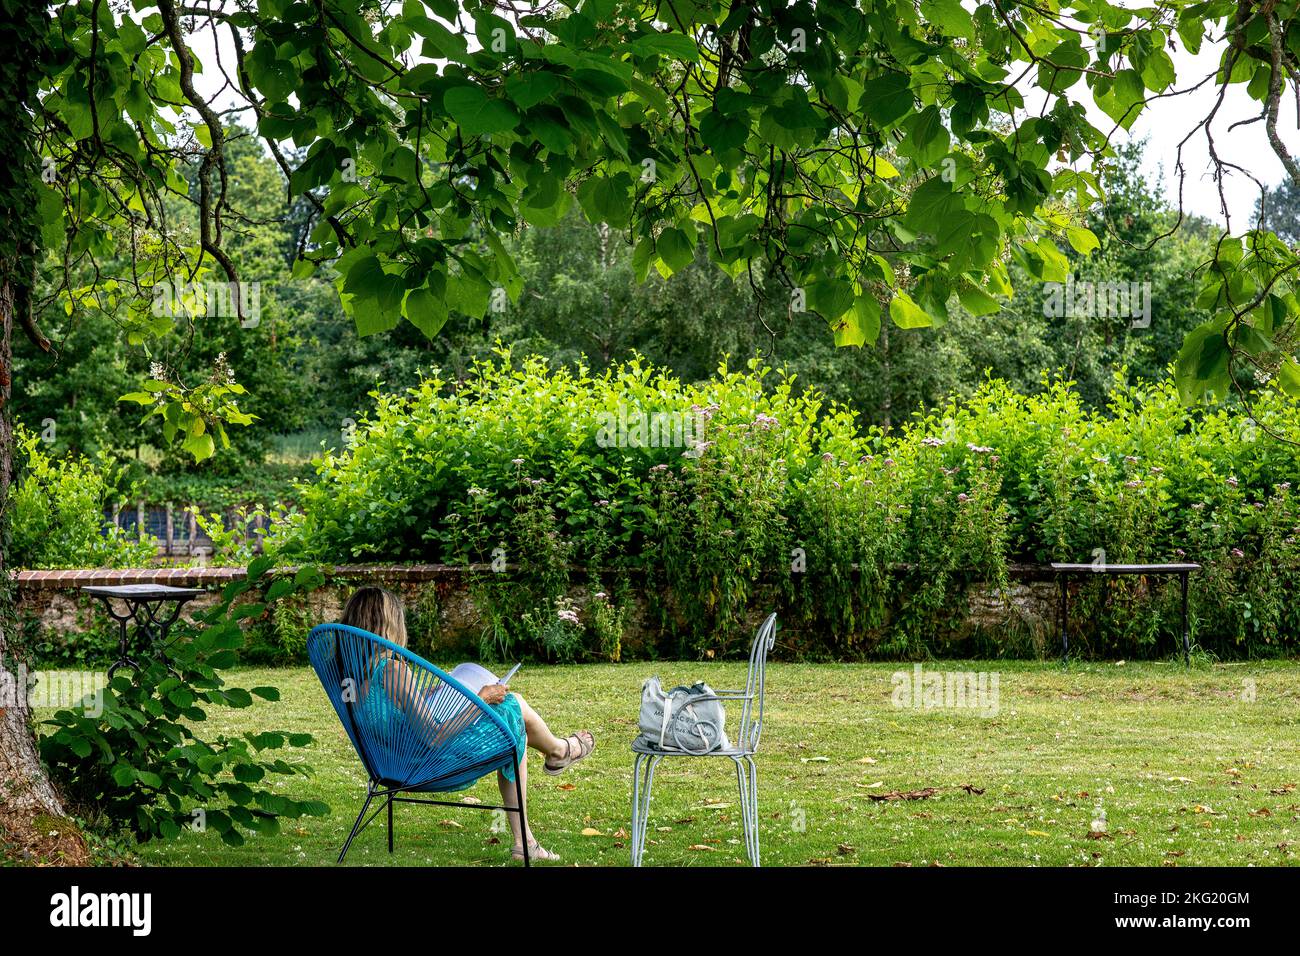 Adult reading in an armchair in a garden in western France Stock Photo